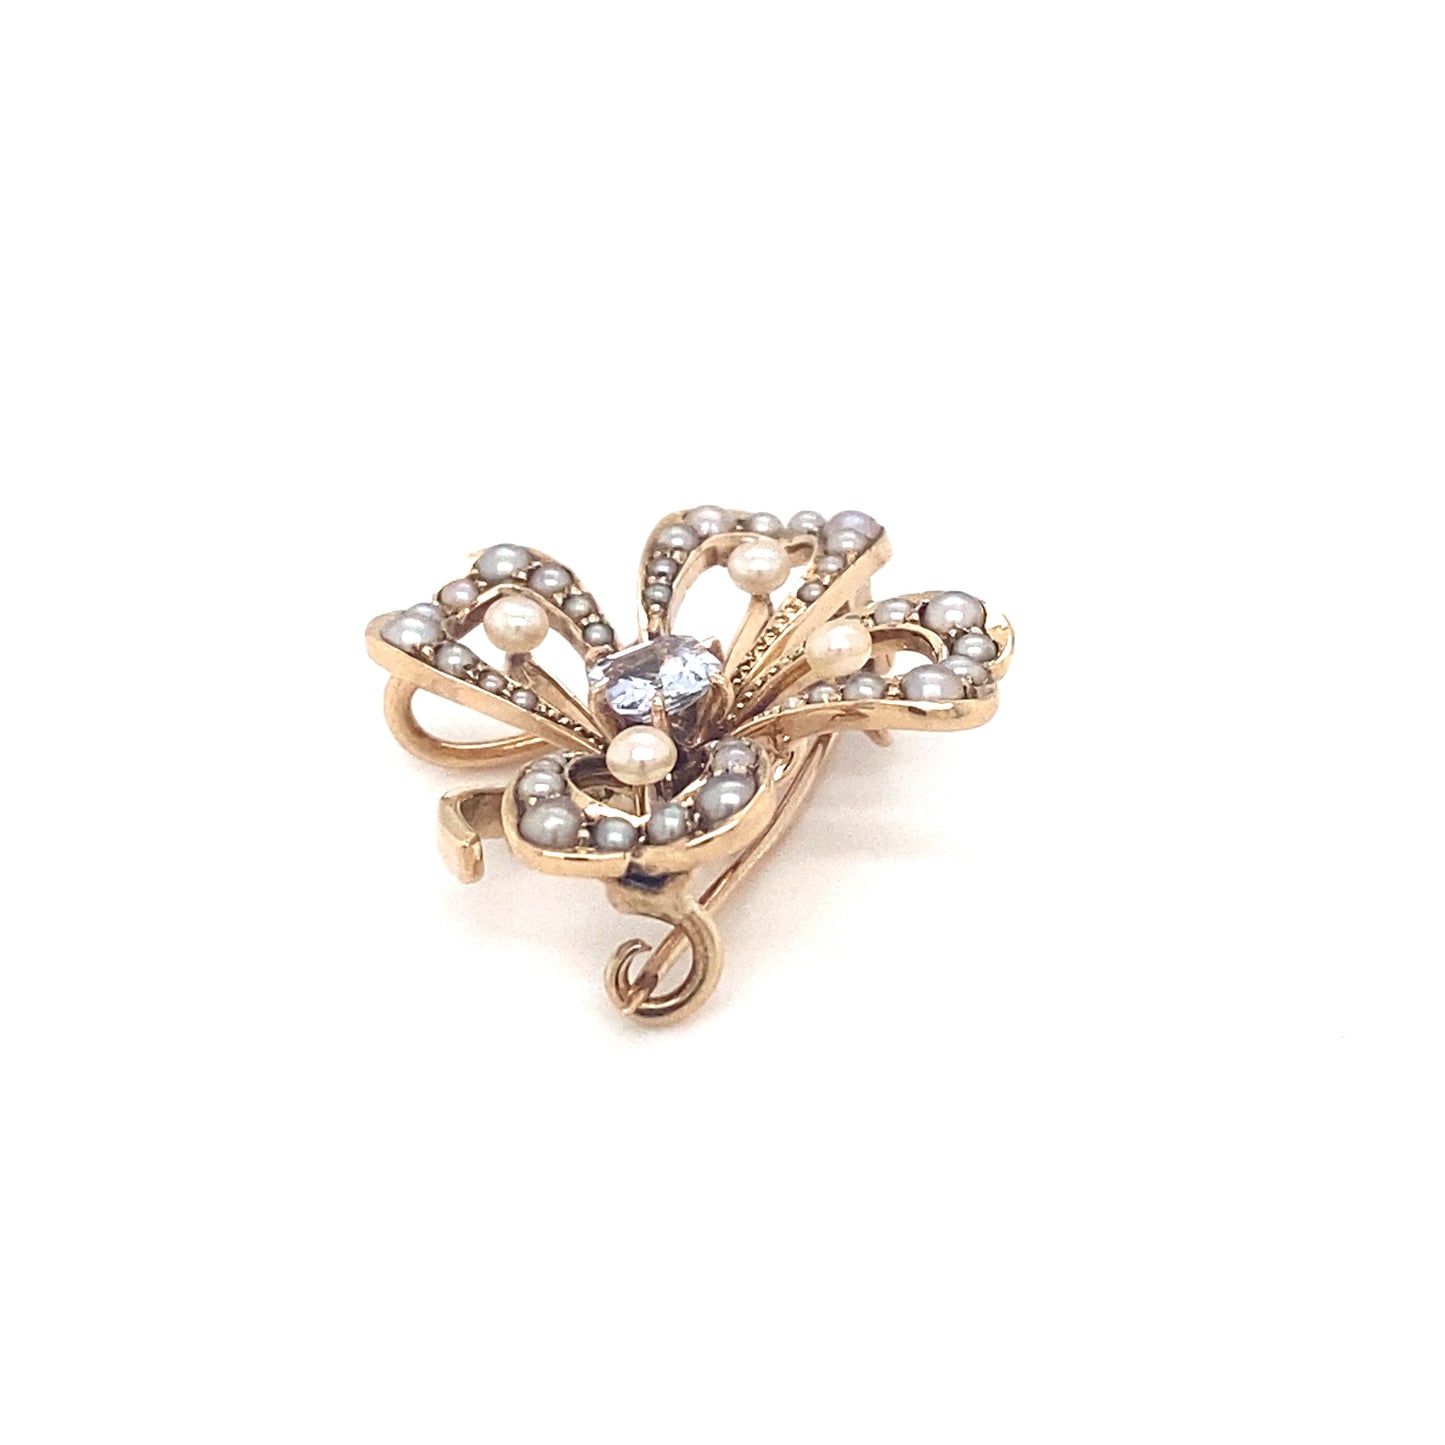 Circa 1890s Victorian Pearl and Ceylon Sapphire Clover Brooch in 14K Gold